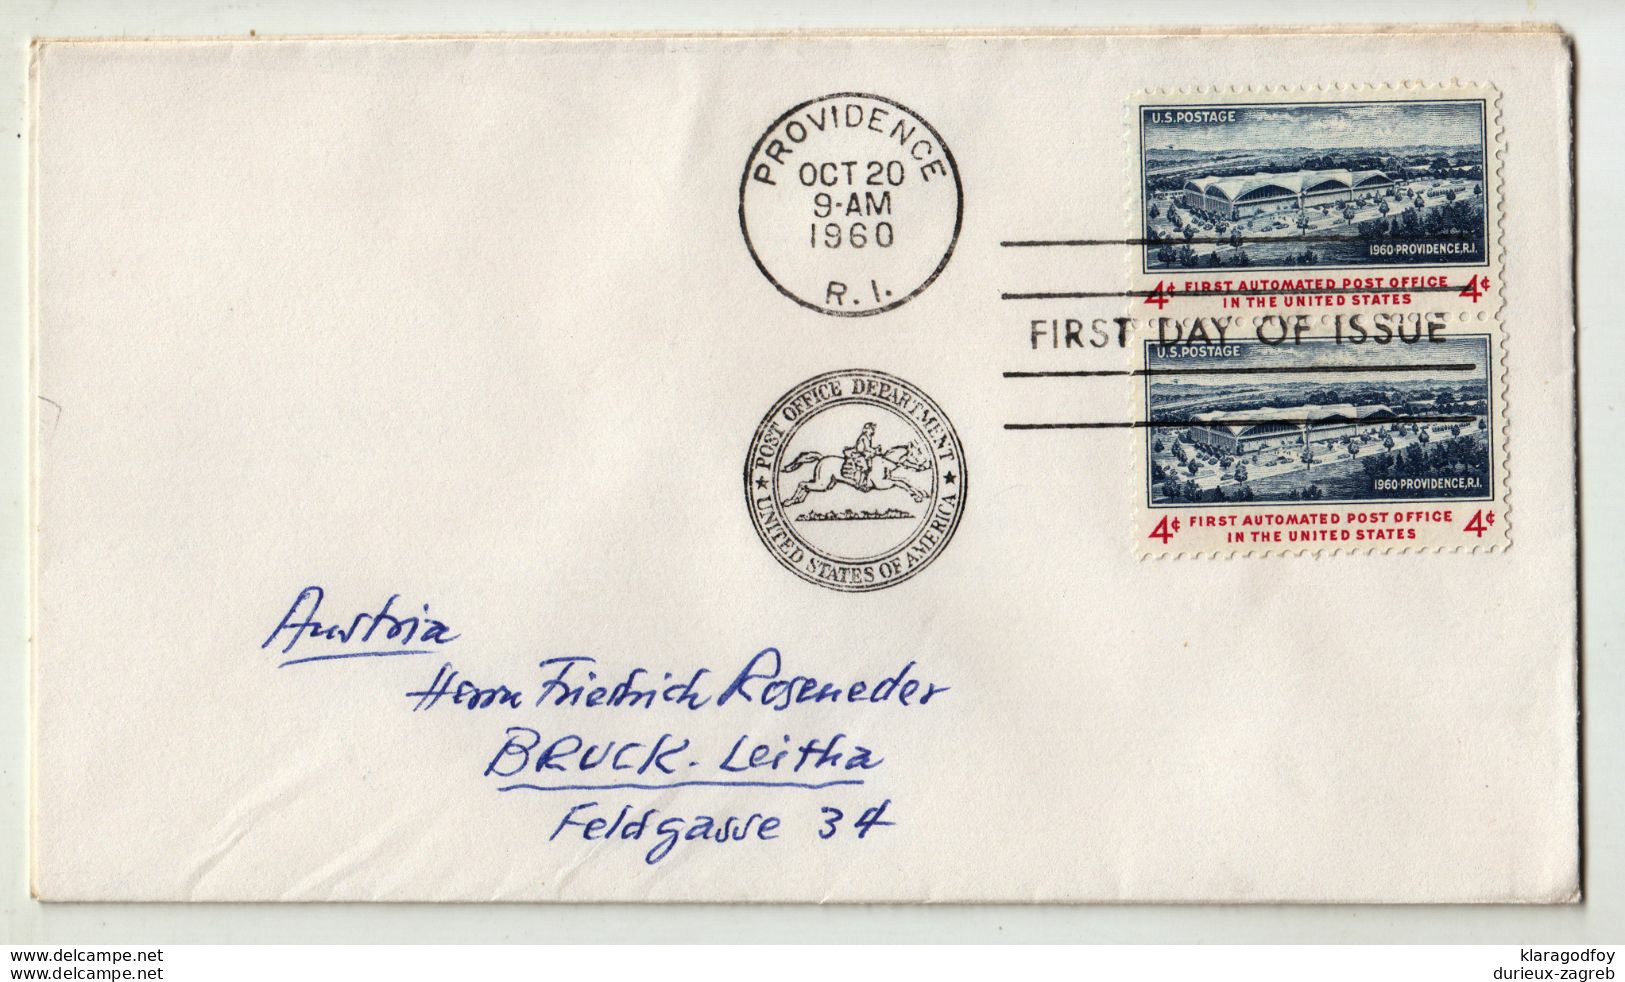 Providence, FIrst Automated Post Office In The United States FDC 1960 B200901 - 1951-1960